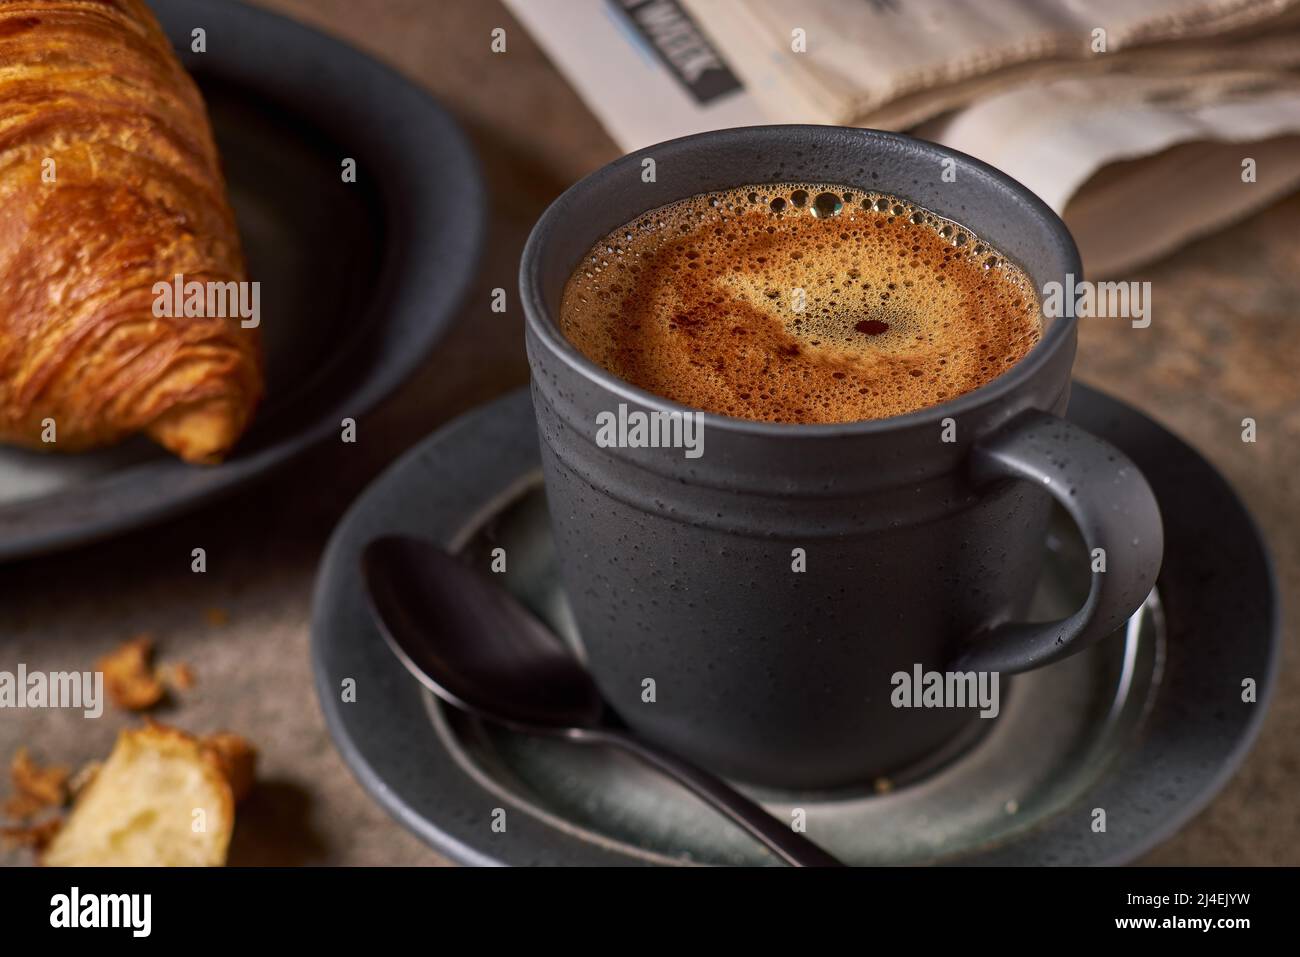 Black coffee with foam in dark cup and croissant on table Stock Photo